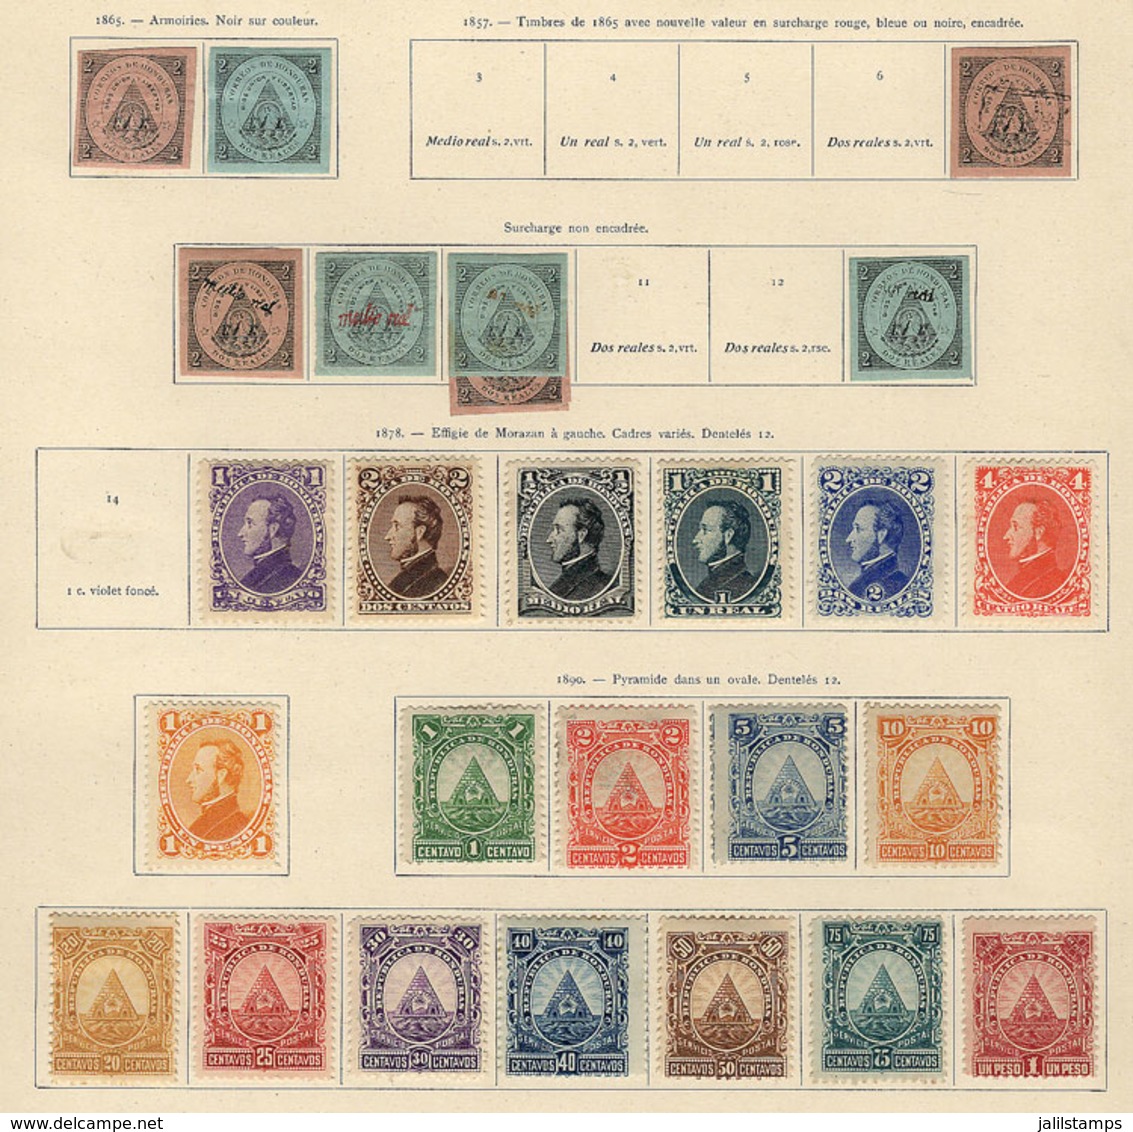 HONDURAS: Old Collection On Yvert Album Pages, Used And Mint Stamps Of Fine To VF General Quality, Including A Lot Of Sc - Honduras